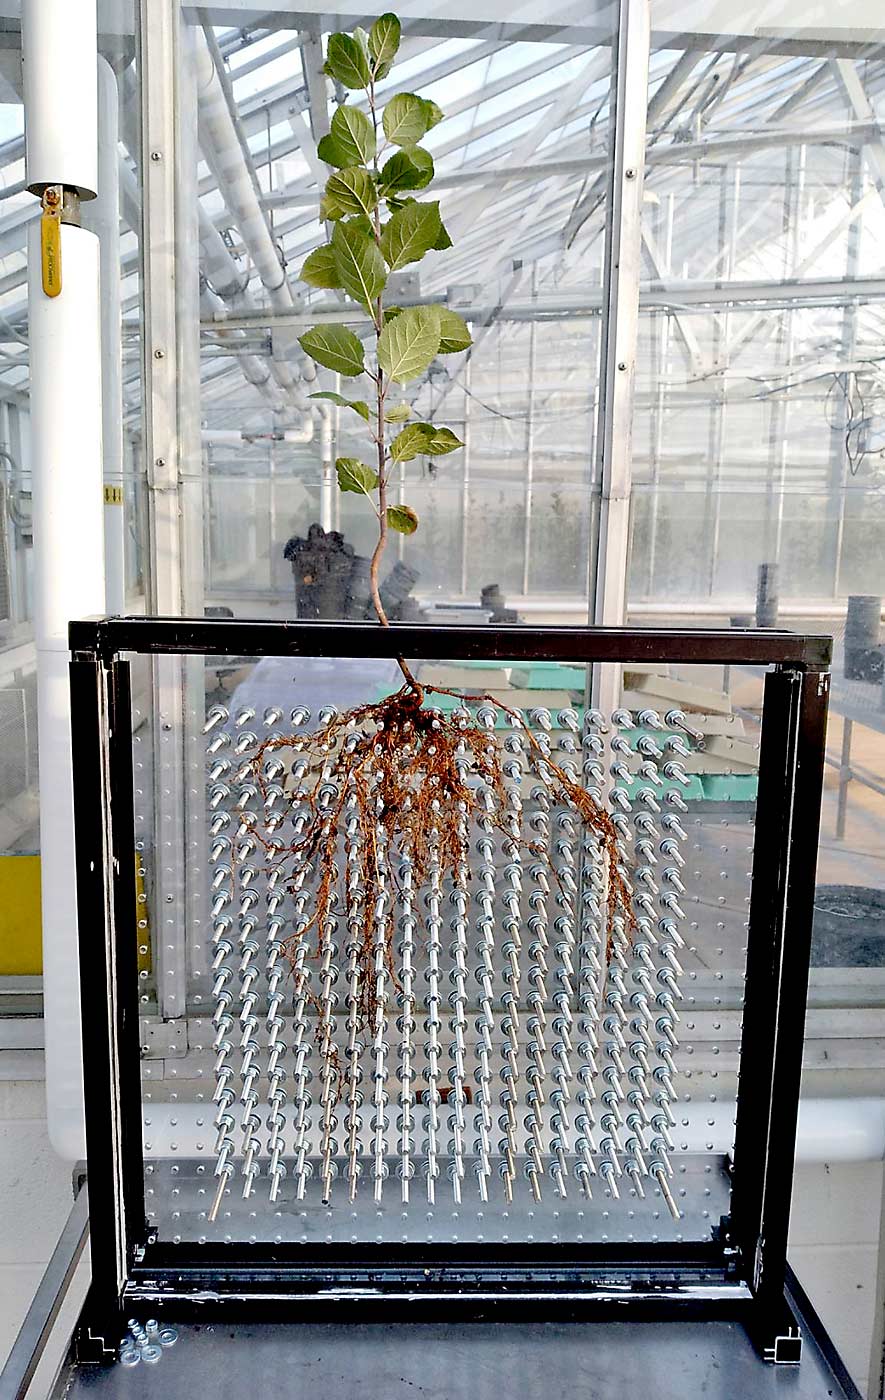 A special growing container allows for observations of root architecture of fruit trees at the U.S. Department of Agriculture’s Appalachian Fruit Research Station. The pinboard-like matrix of rods inside the container keeps the roots in place during soil removal and preserves important root traits associated with stress escape mechanisms, such as root growth angle and depth. (Courtesy USDA Agricultural Research Service)